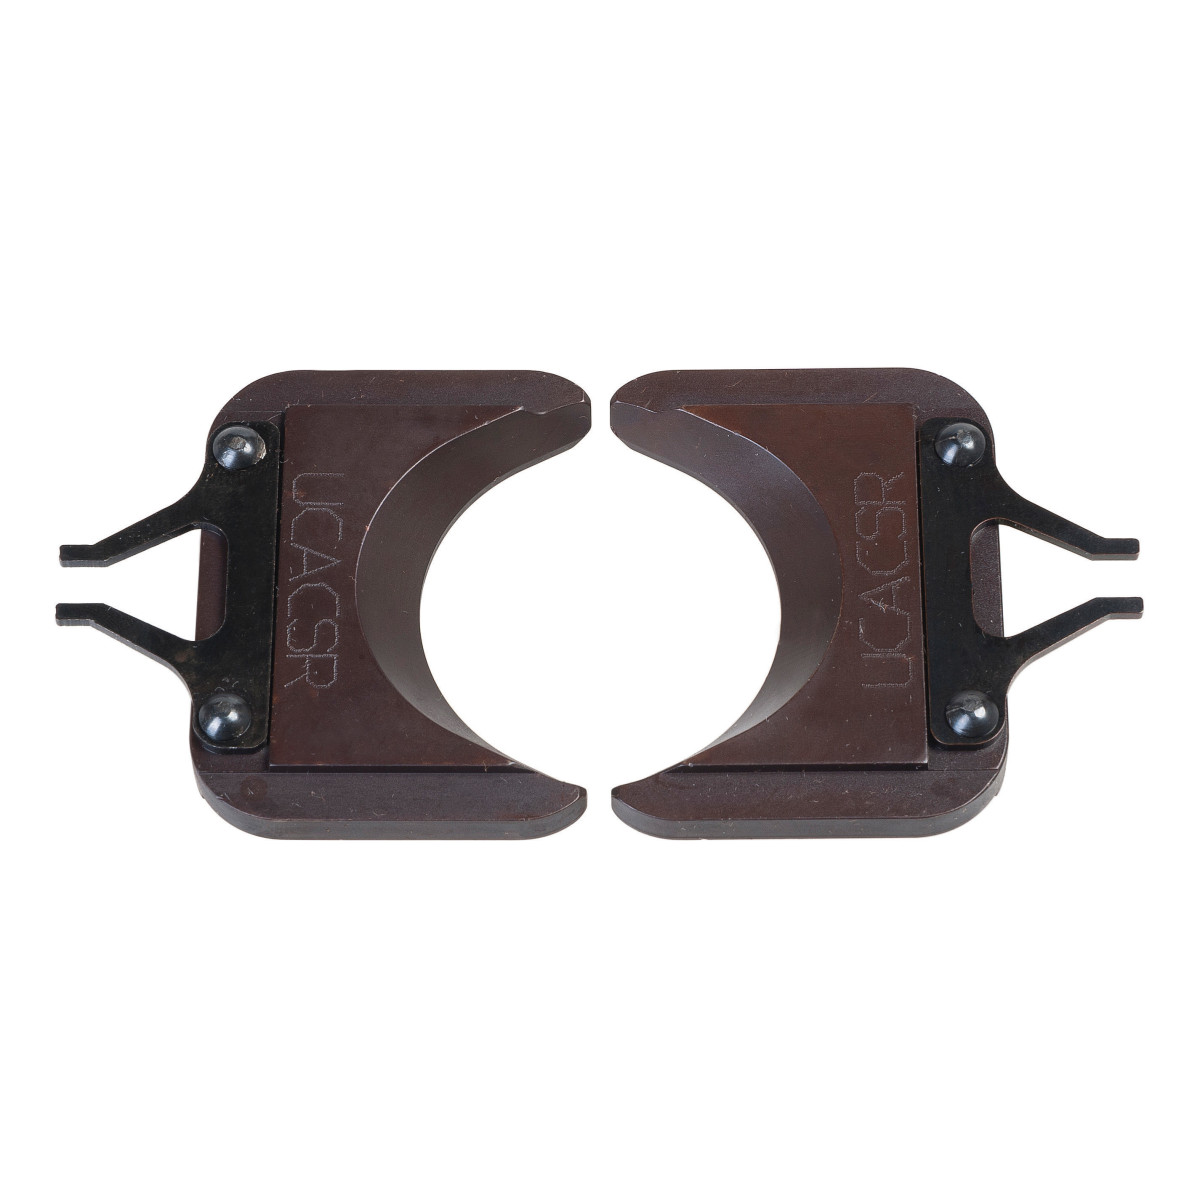 Cable Cutter Blades for ACSR & guy strand.  For ECCXL and E12CCX Tool.